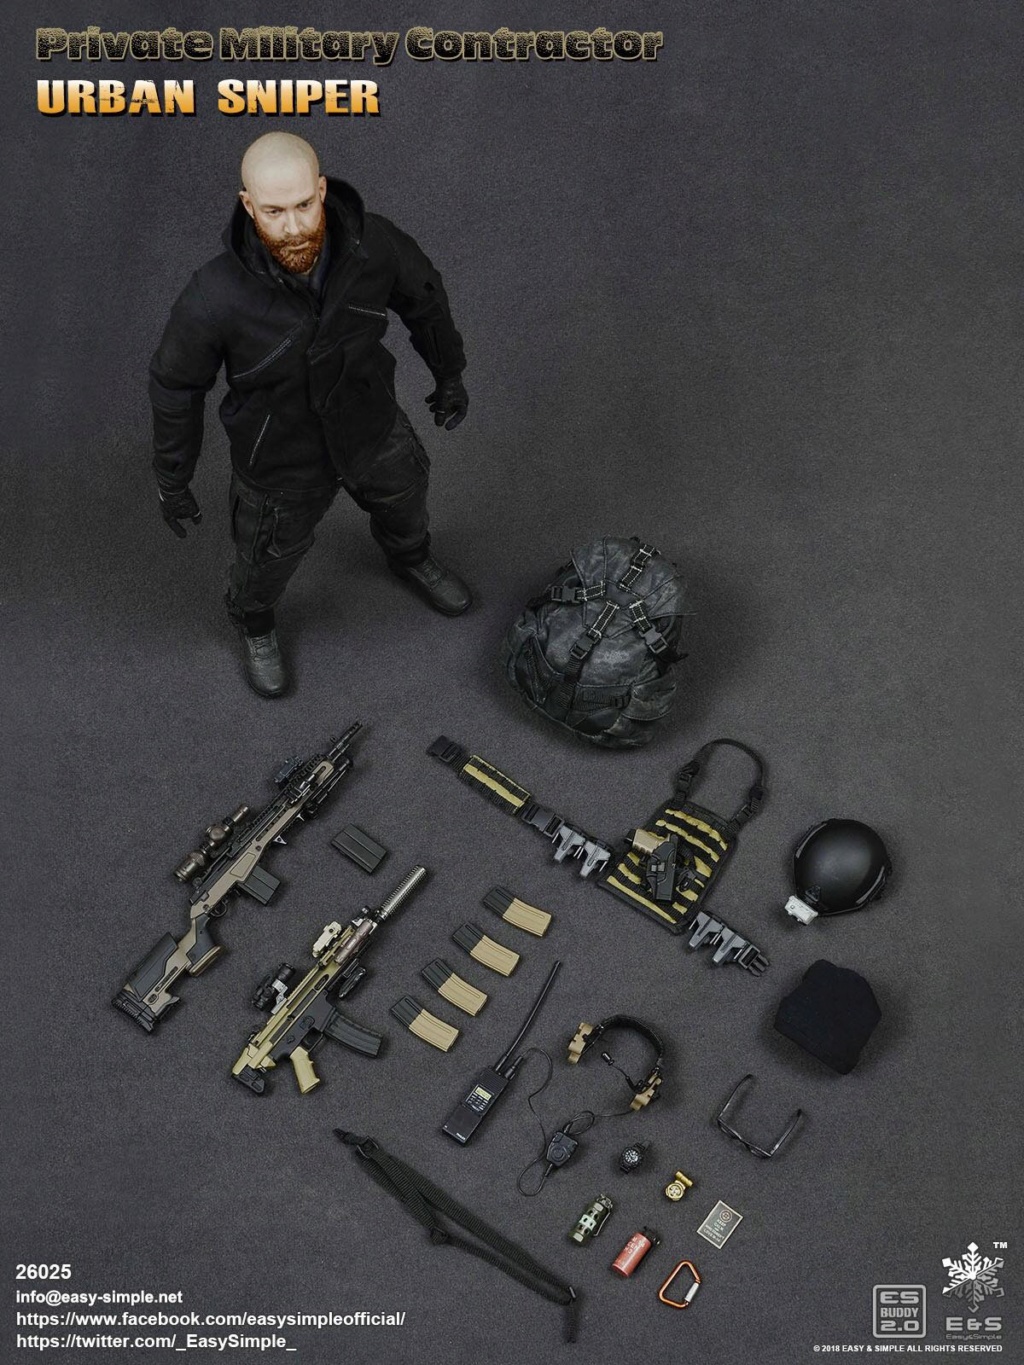 UrbanSniper - NEW PRODUCT: EASY & SIMPLE: Private Military Contractor Urban Sniper - 1/6 Scale Figure (EAS-26025) 4612